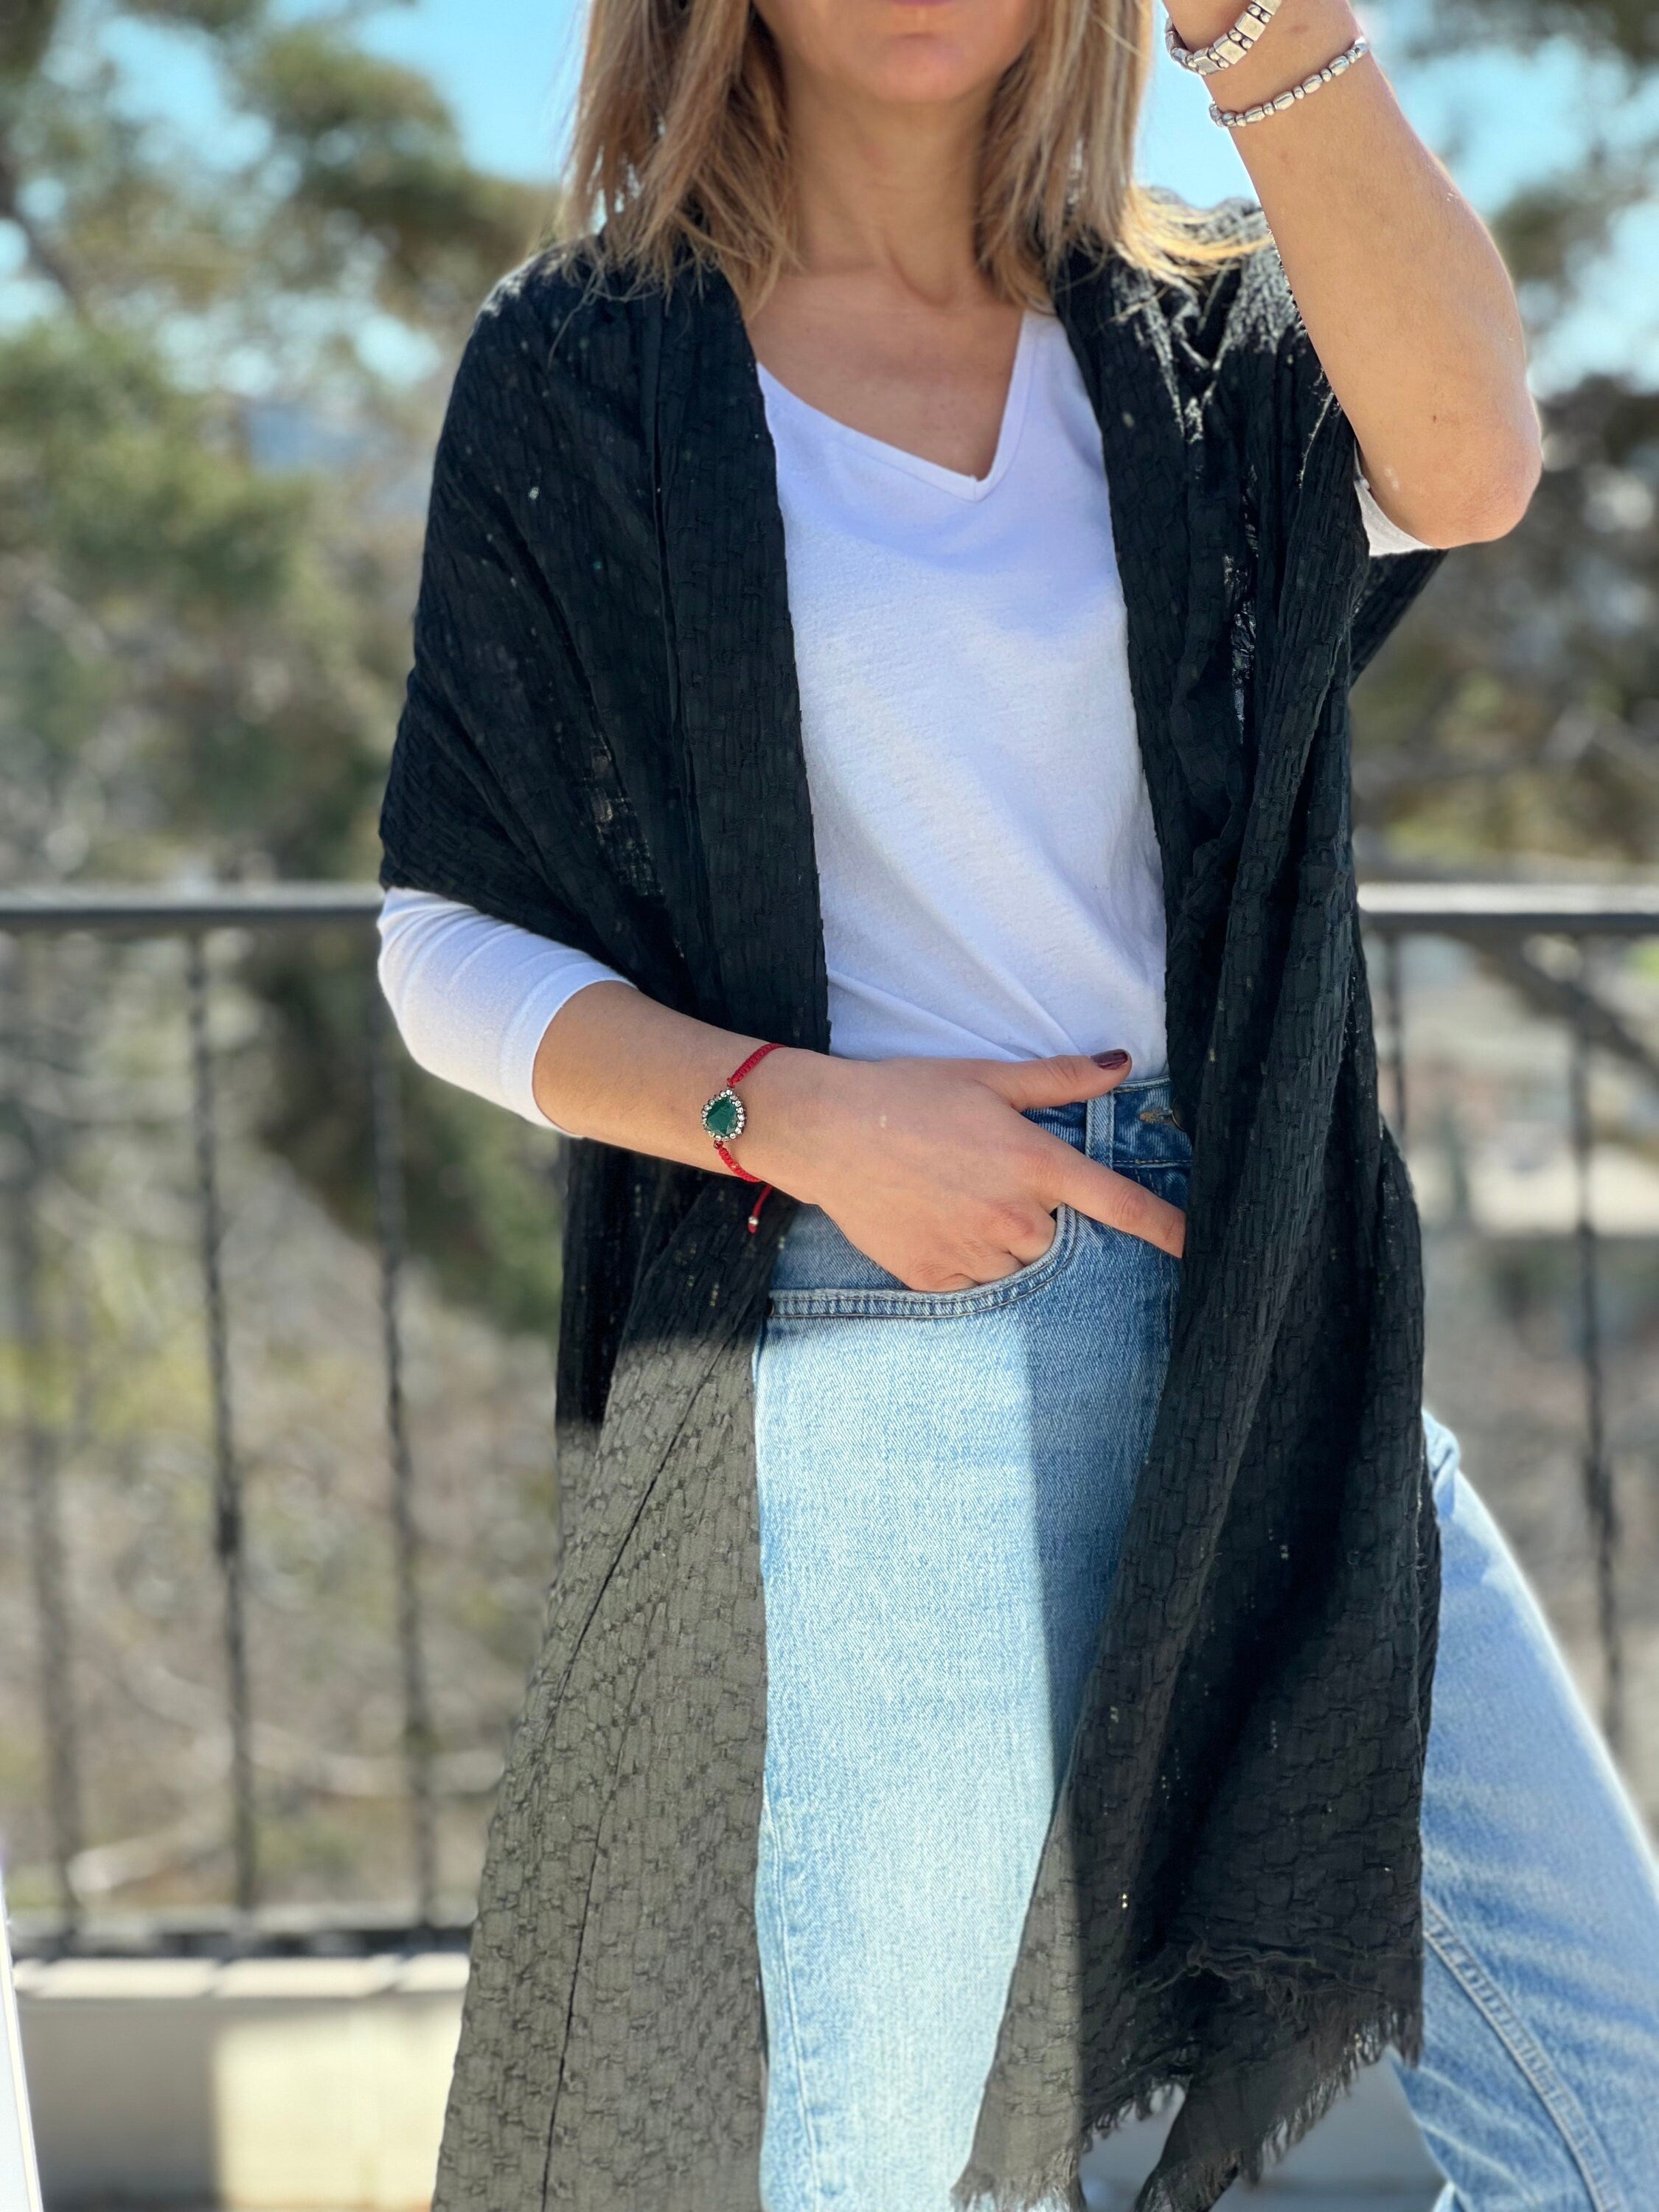 Keep your loved ones warm and cozy this winter with a large square cotton scarf in a soft gray color. This scarf is made from 100% organic cotton and is sure to make your mom feel special. It is also the perfect gift for women of all ages.